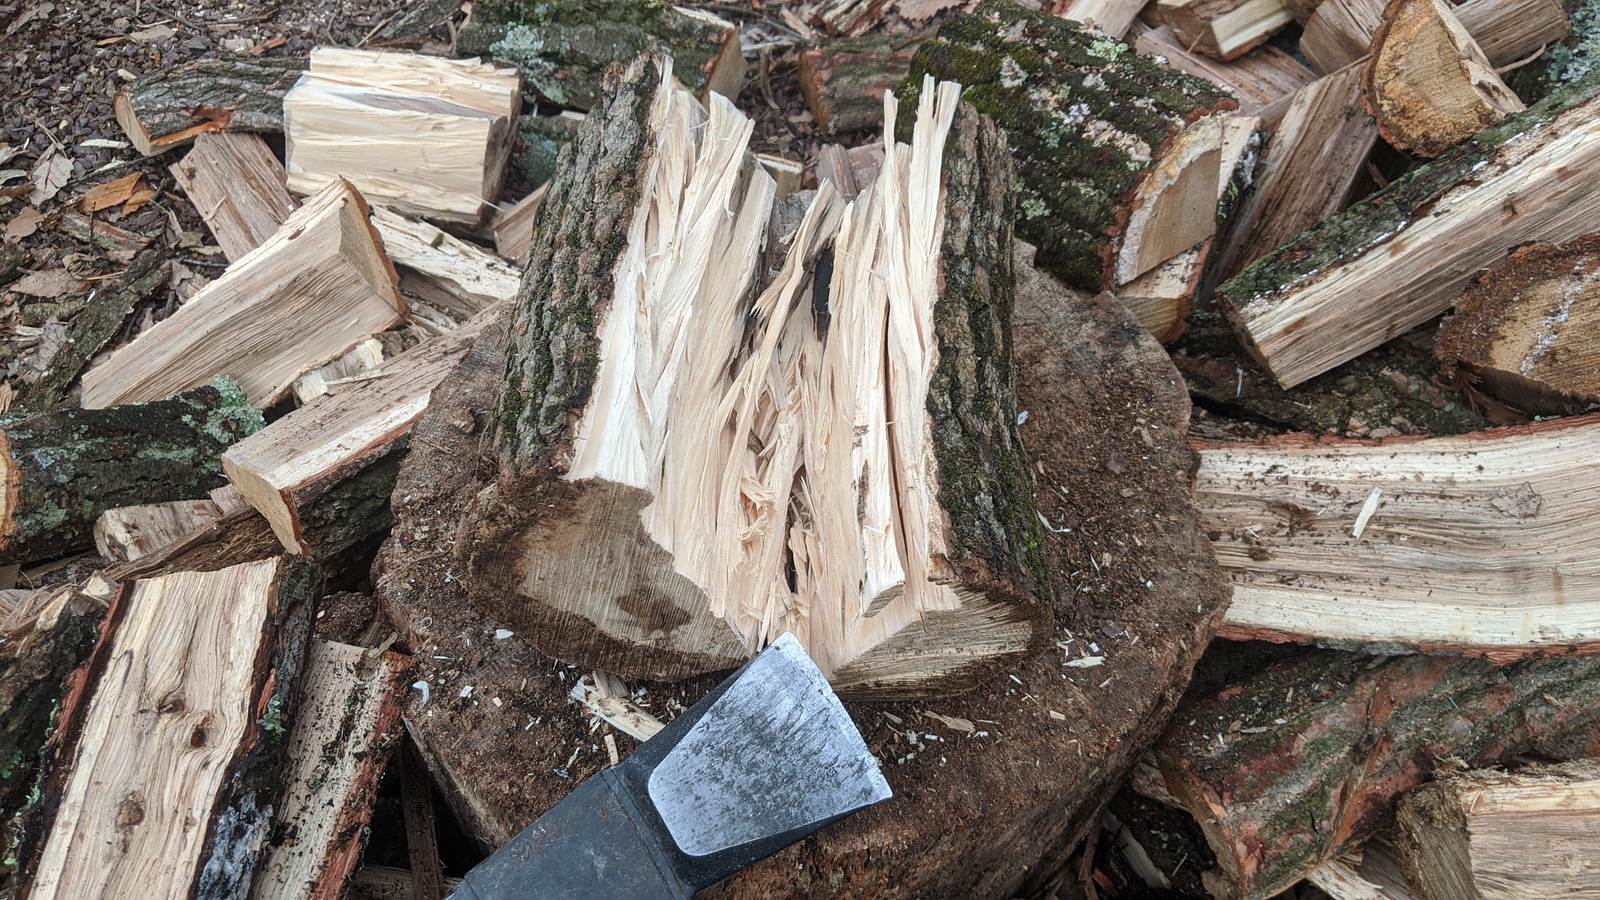 Another wood identification thread